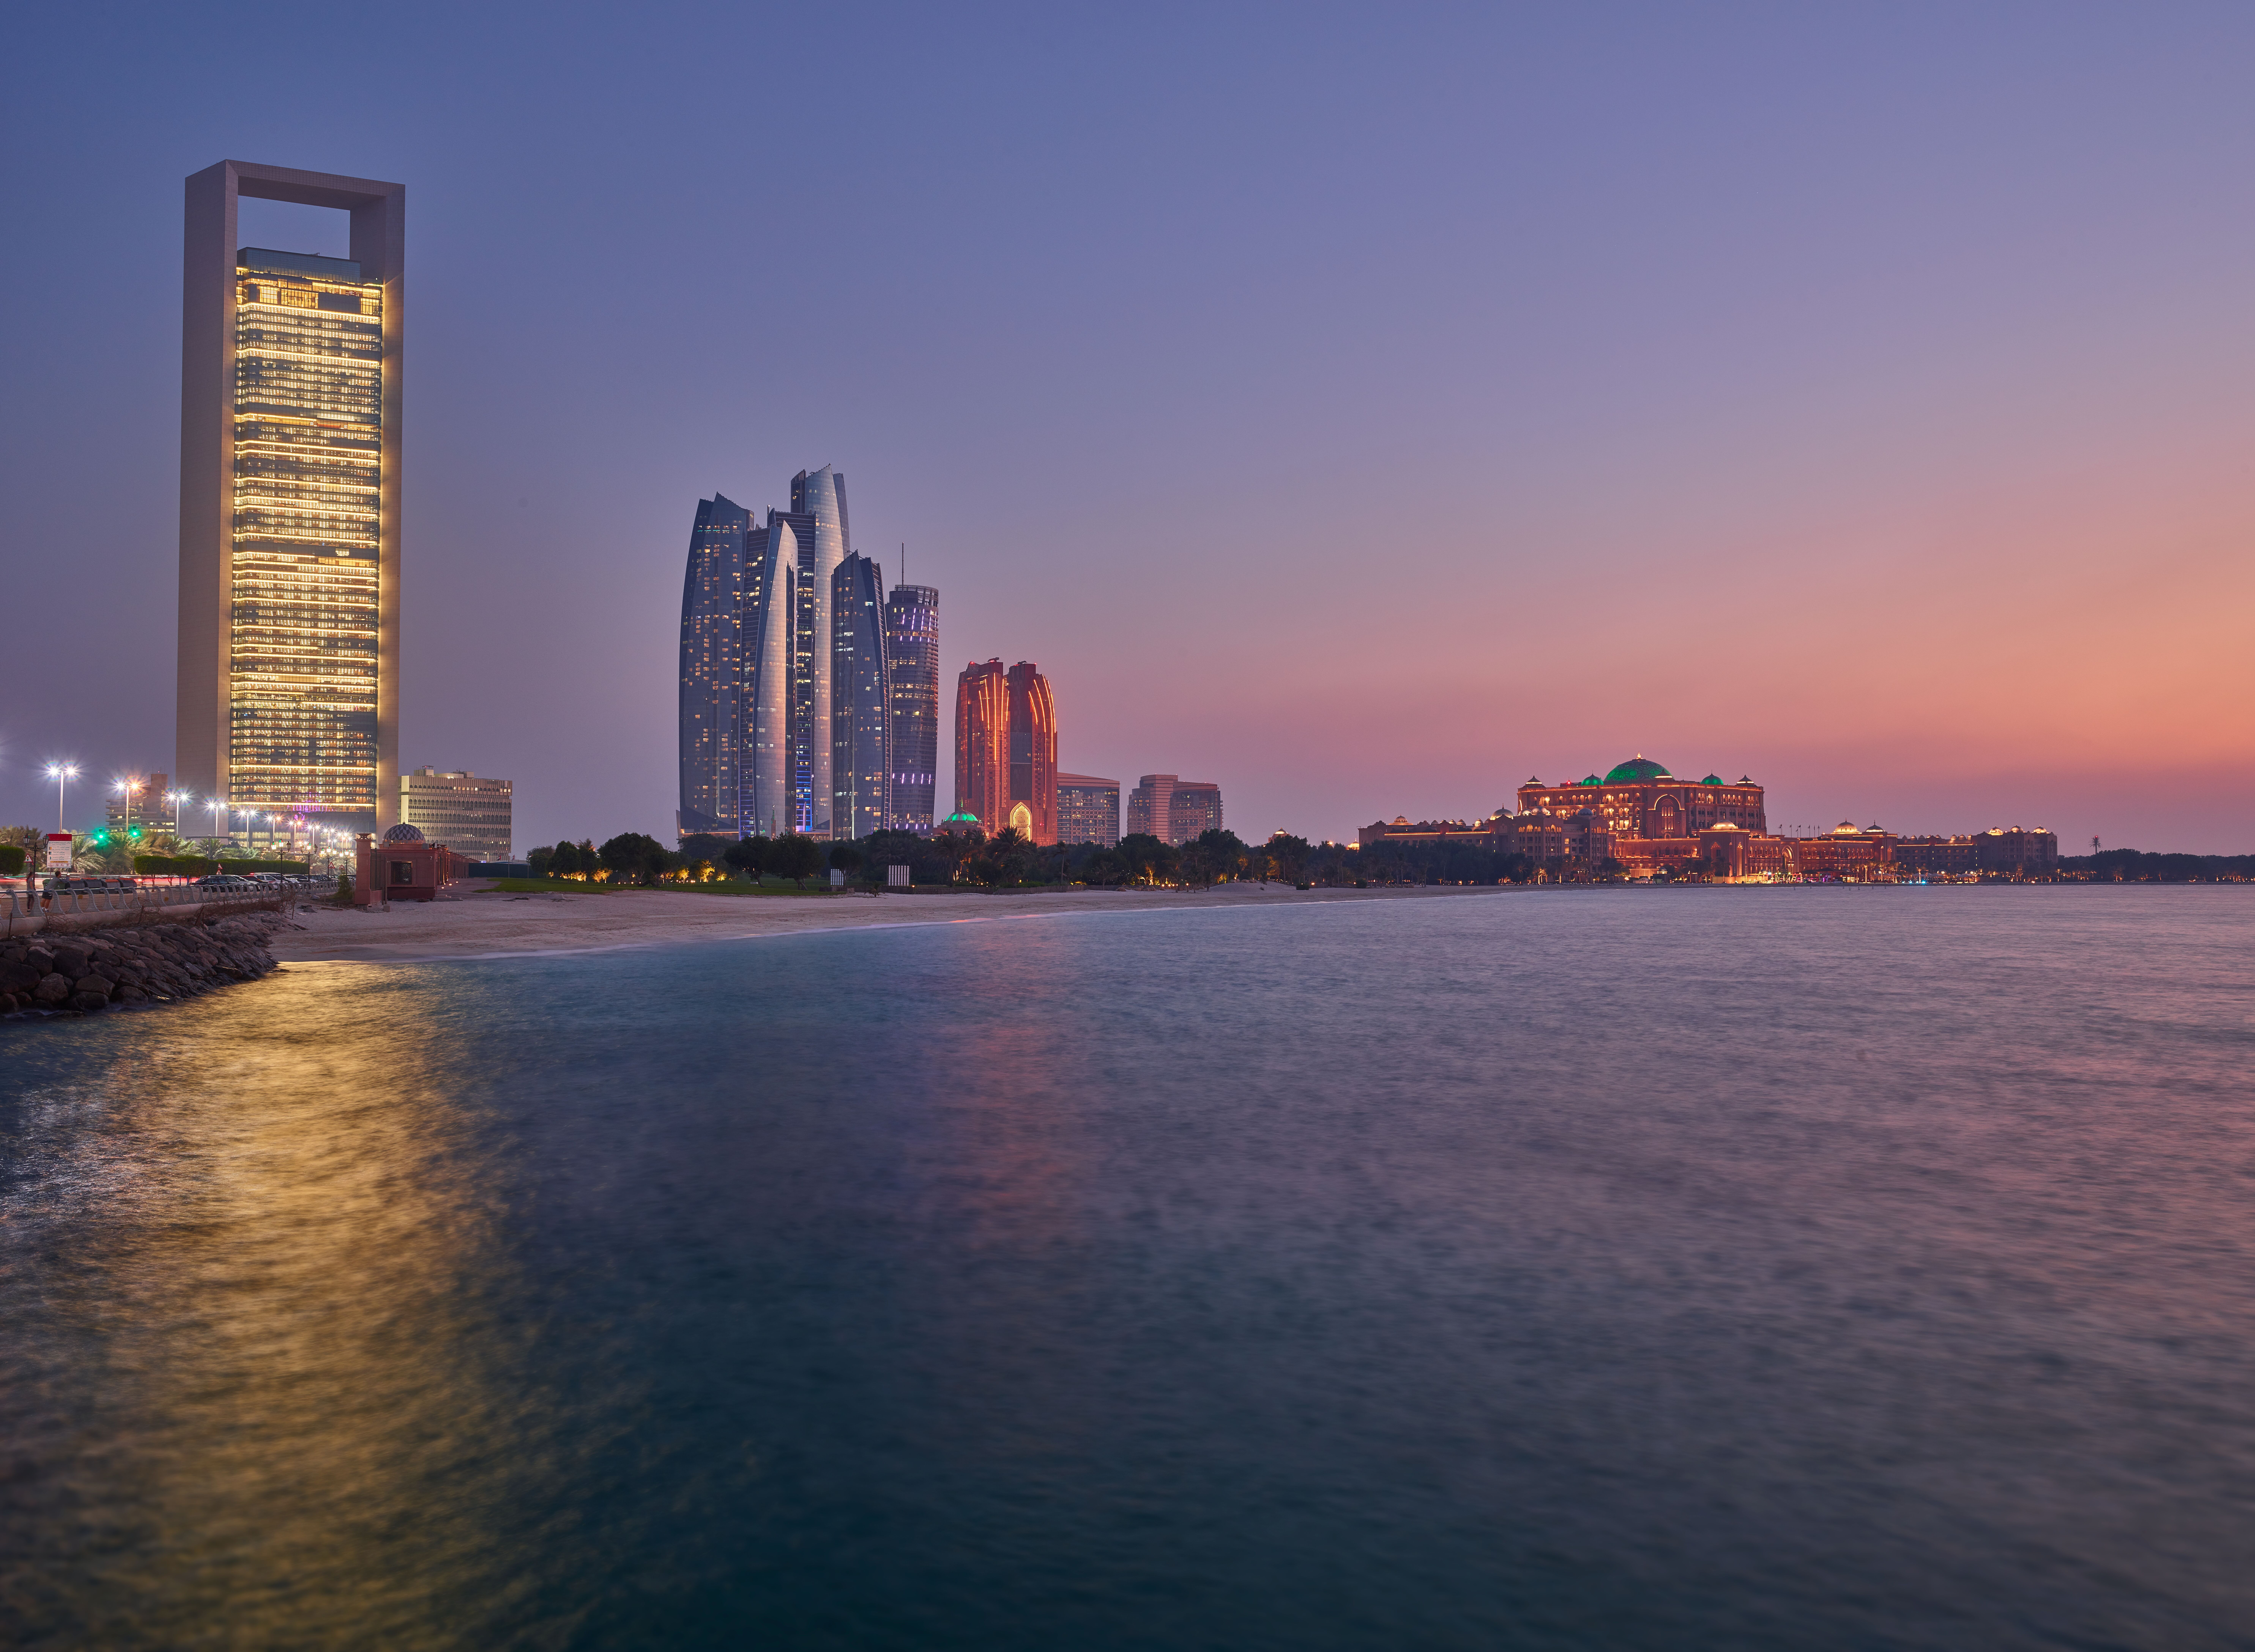 Stunning view of ADNOC HQ building on the Abu Dhabi Corniche at sunset